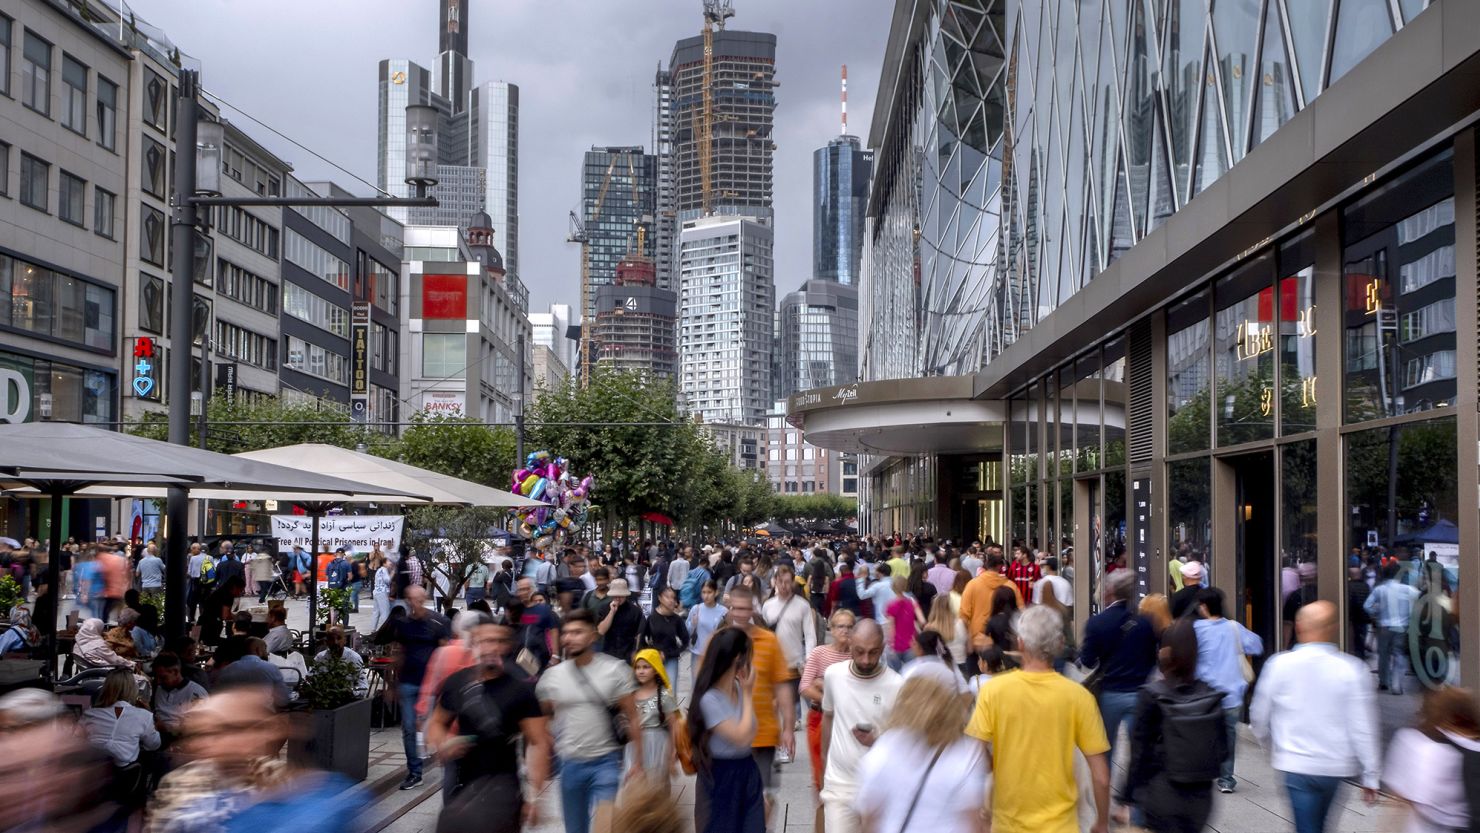 The popular "Zeil" shopping promenade in central Frankfurt, Germany, on August 5, 2023.